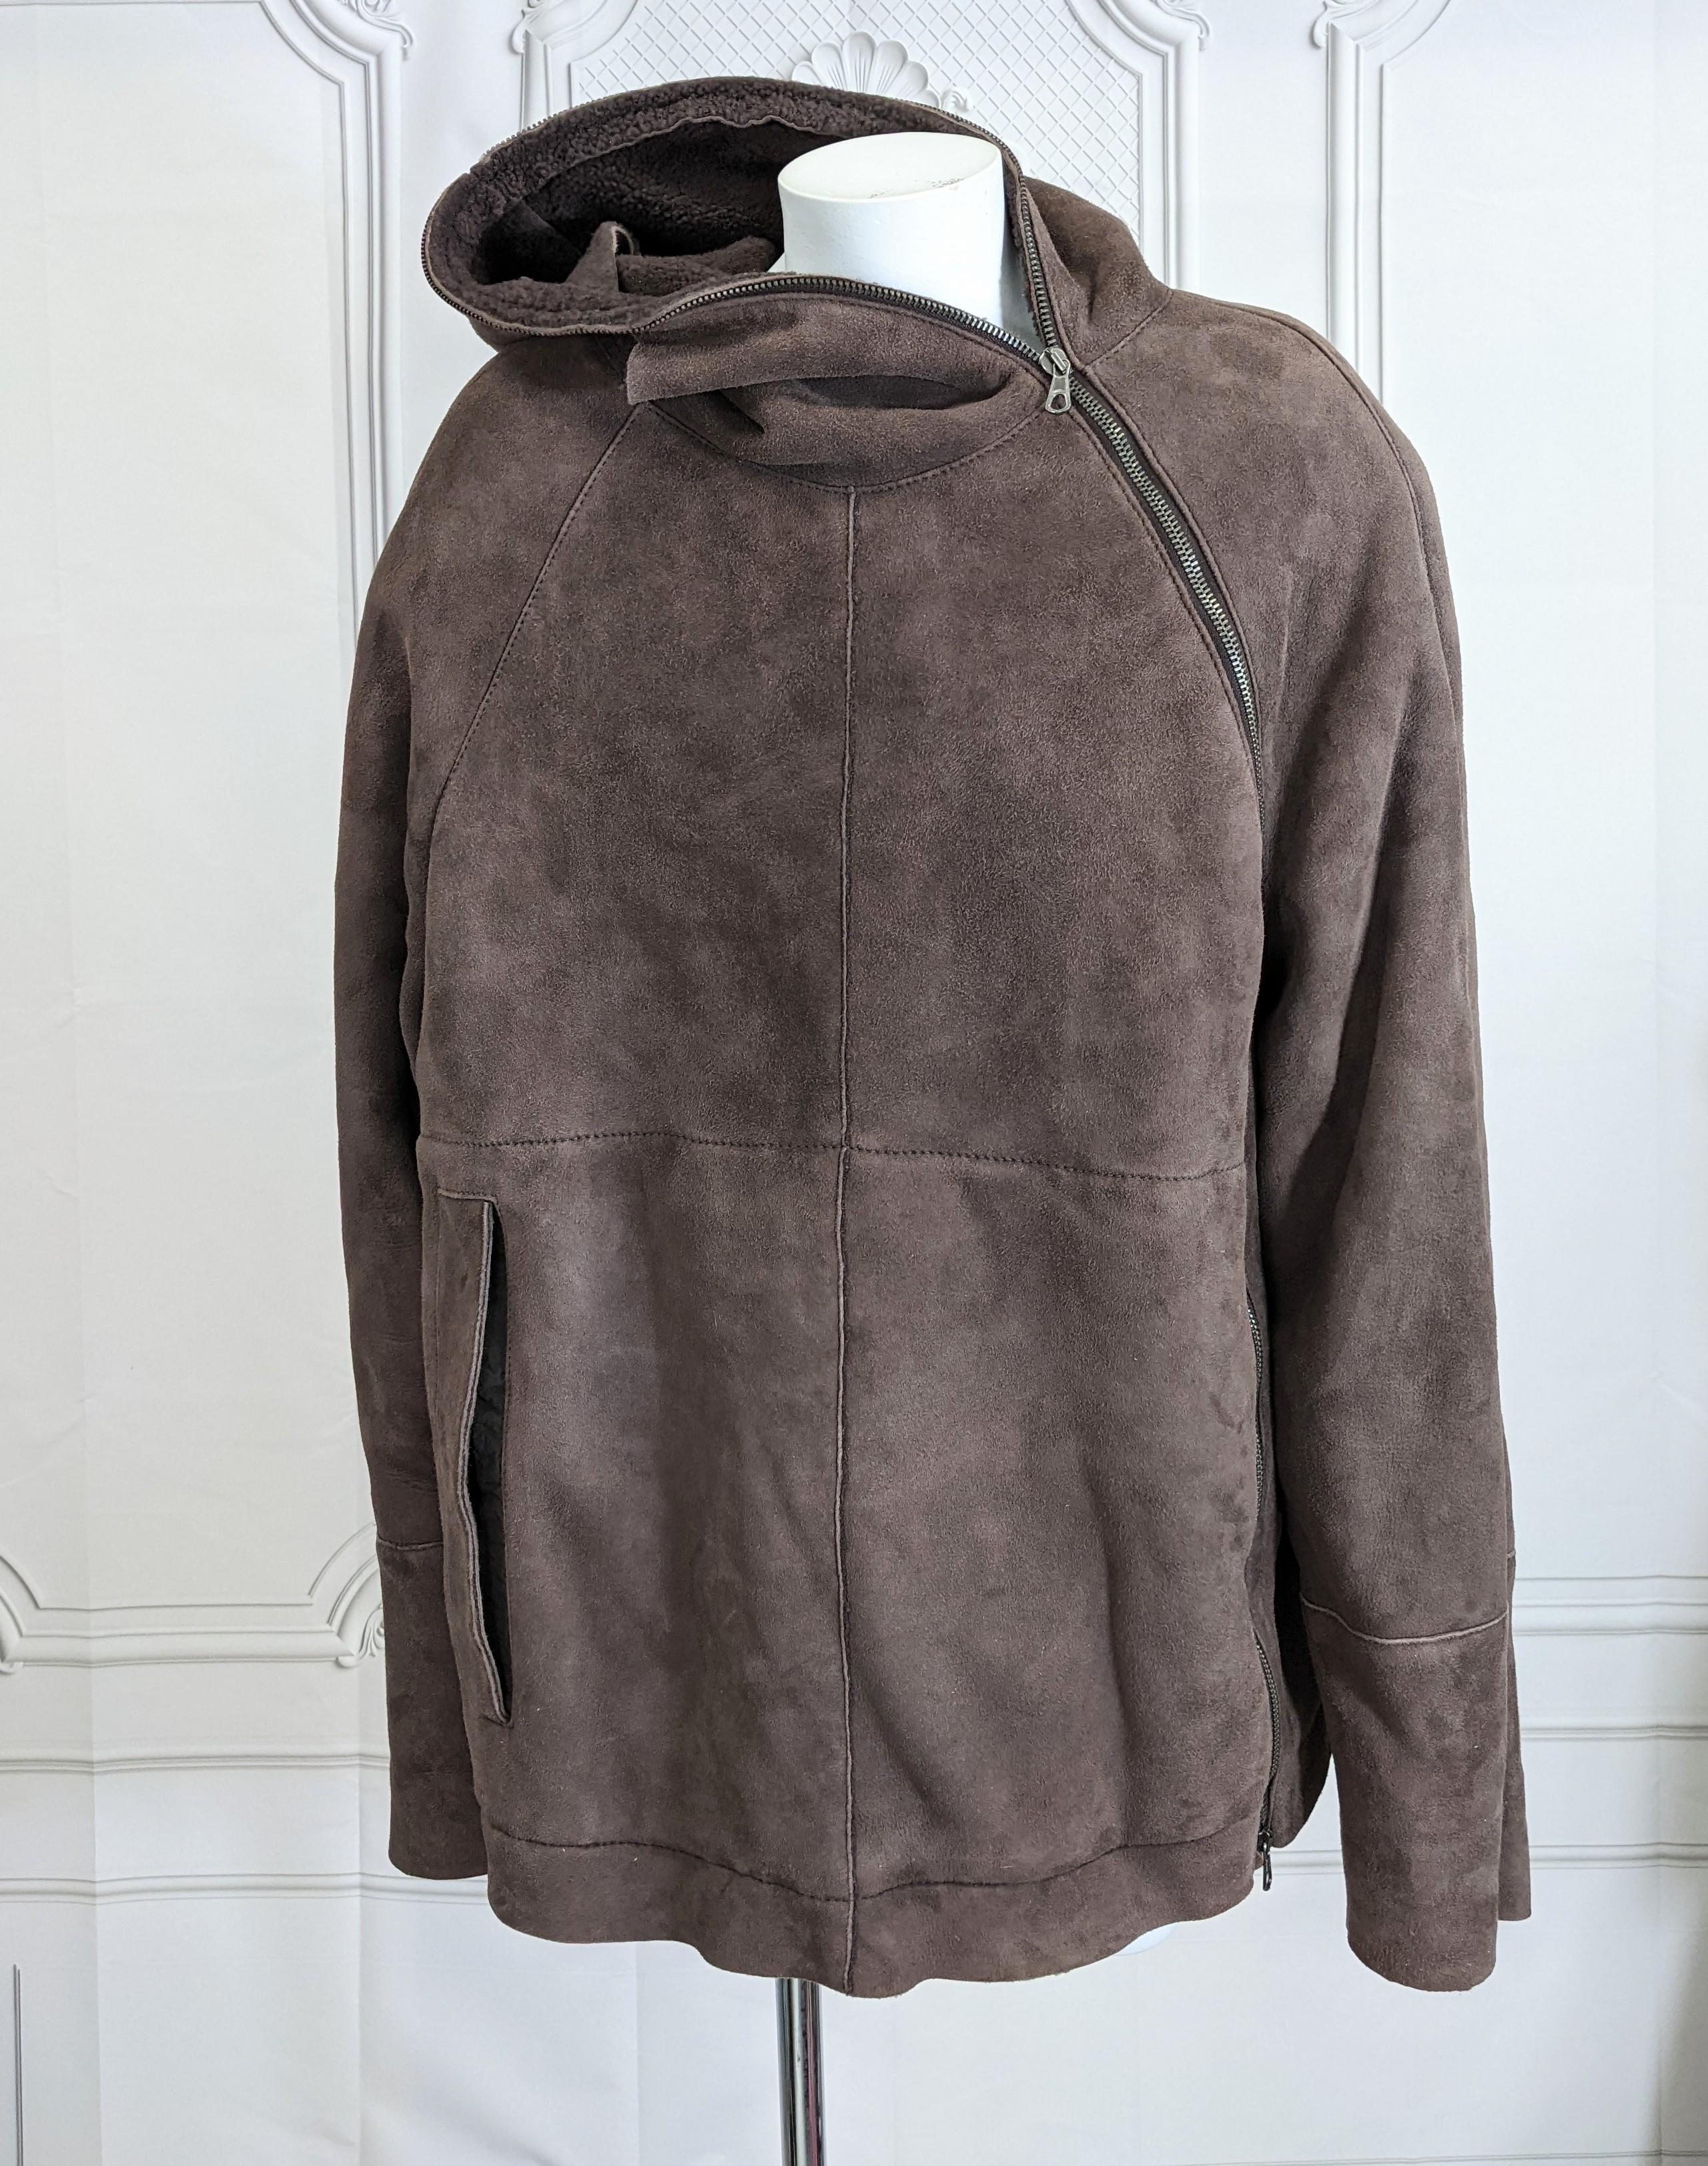 CP Co. Mens Shearling Gumby Hood Anorak from the 1980's Italy. Unusual side zip entry which when closed, forms a full 